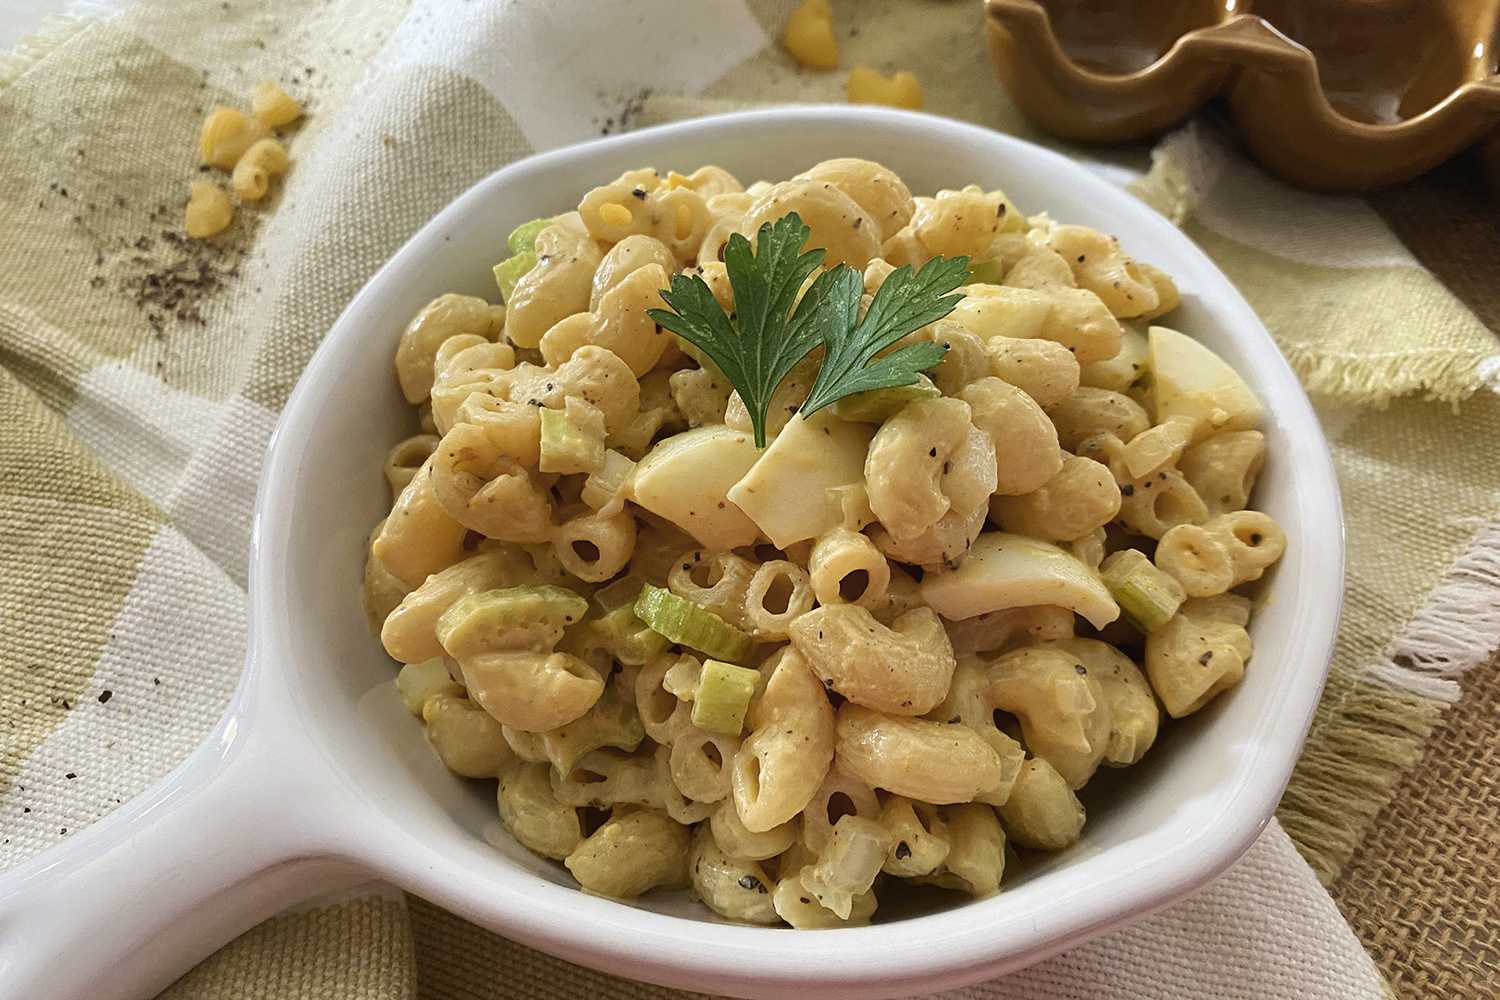 Macaroni with chopped egg and celery topped with parsley